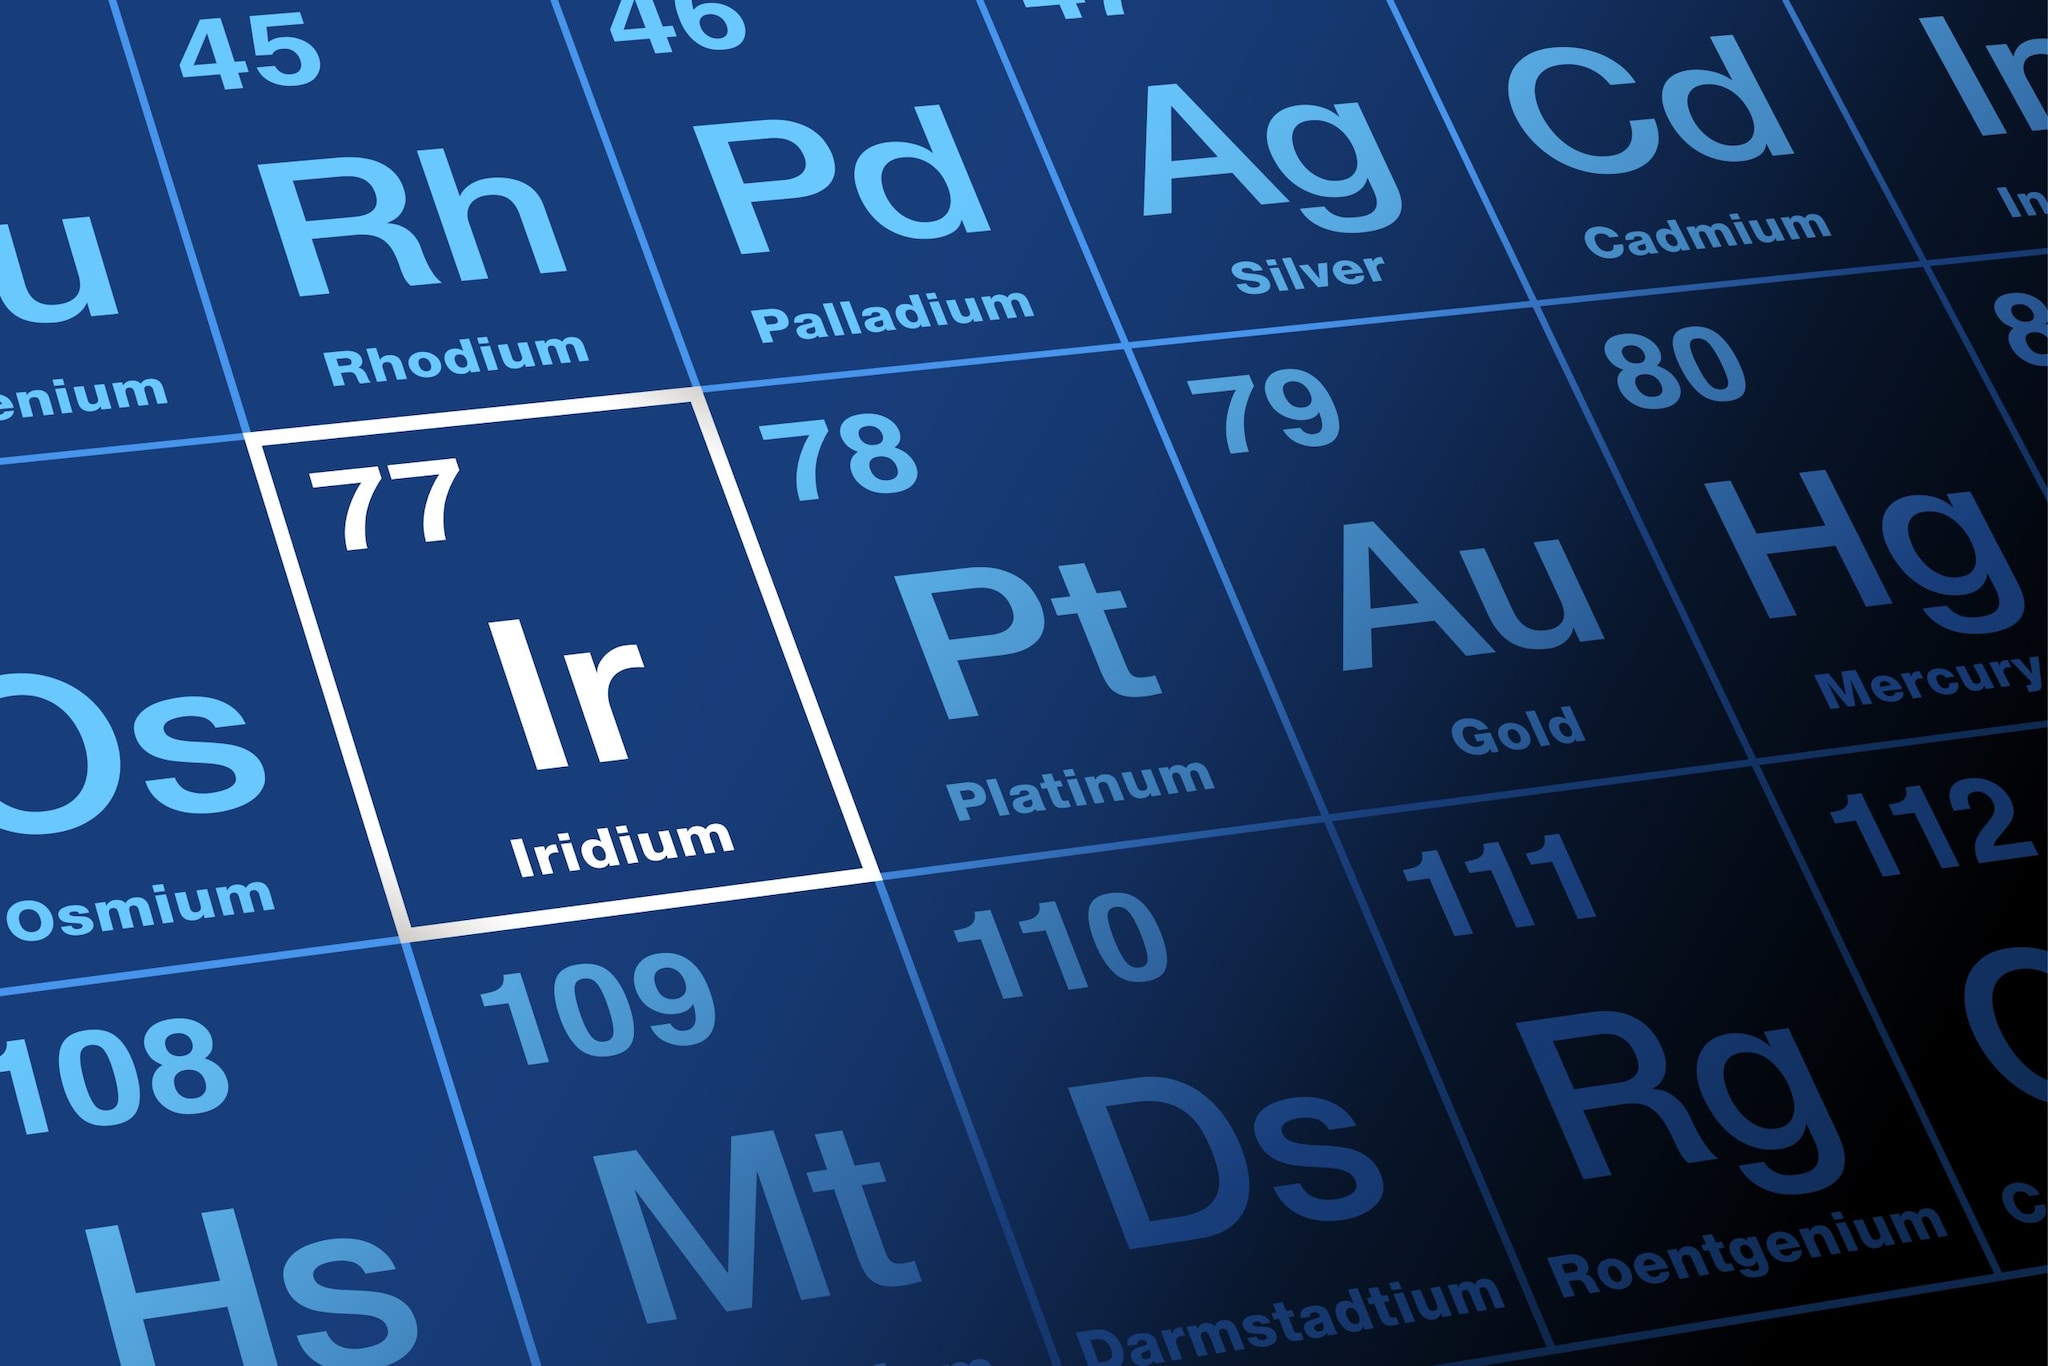 Close-up shot of the periodic table with the element Iridium highlighted in a white box